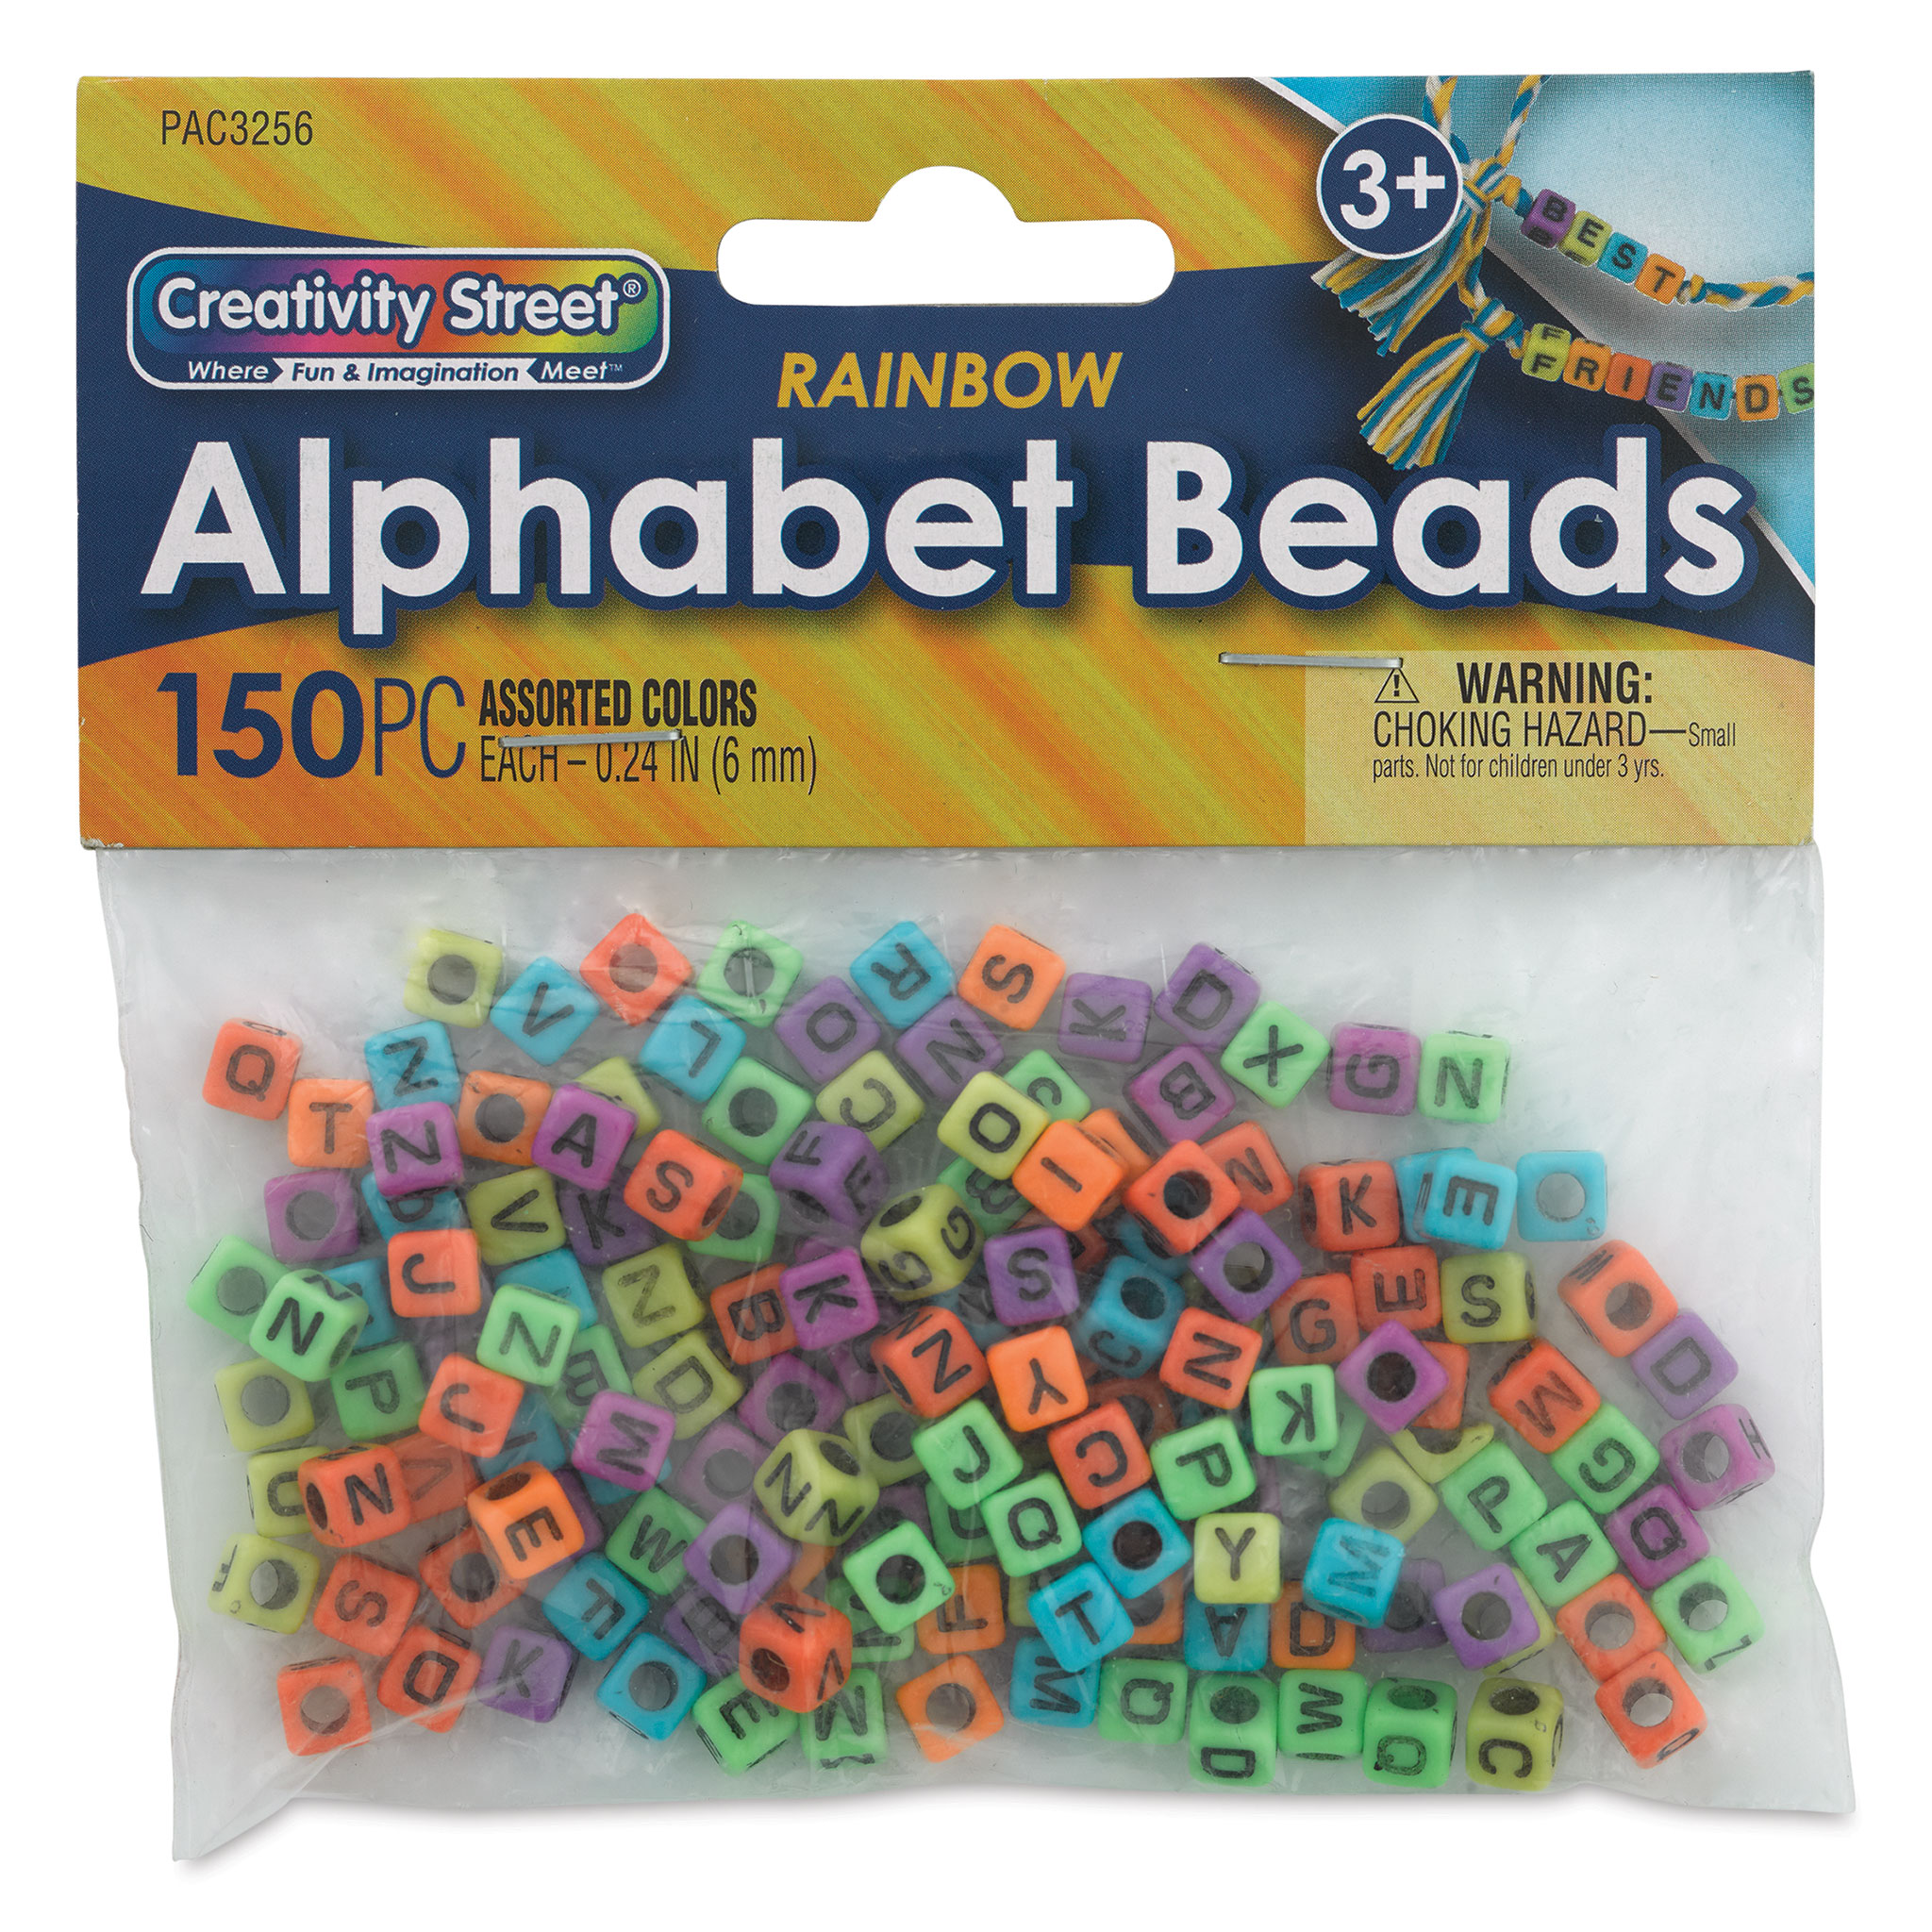 Essentials by Leisure Arts Pony and Alphabet Mixed Beads